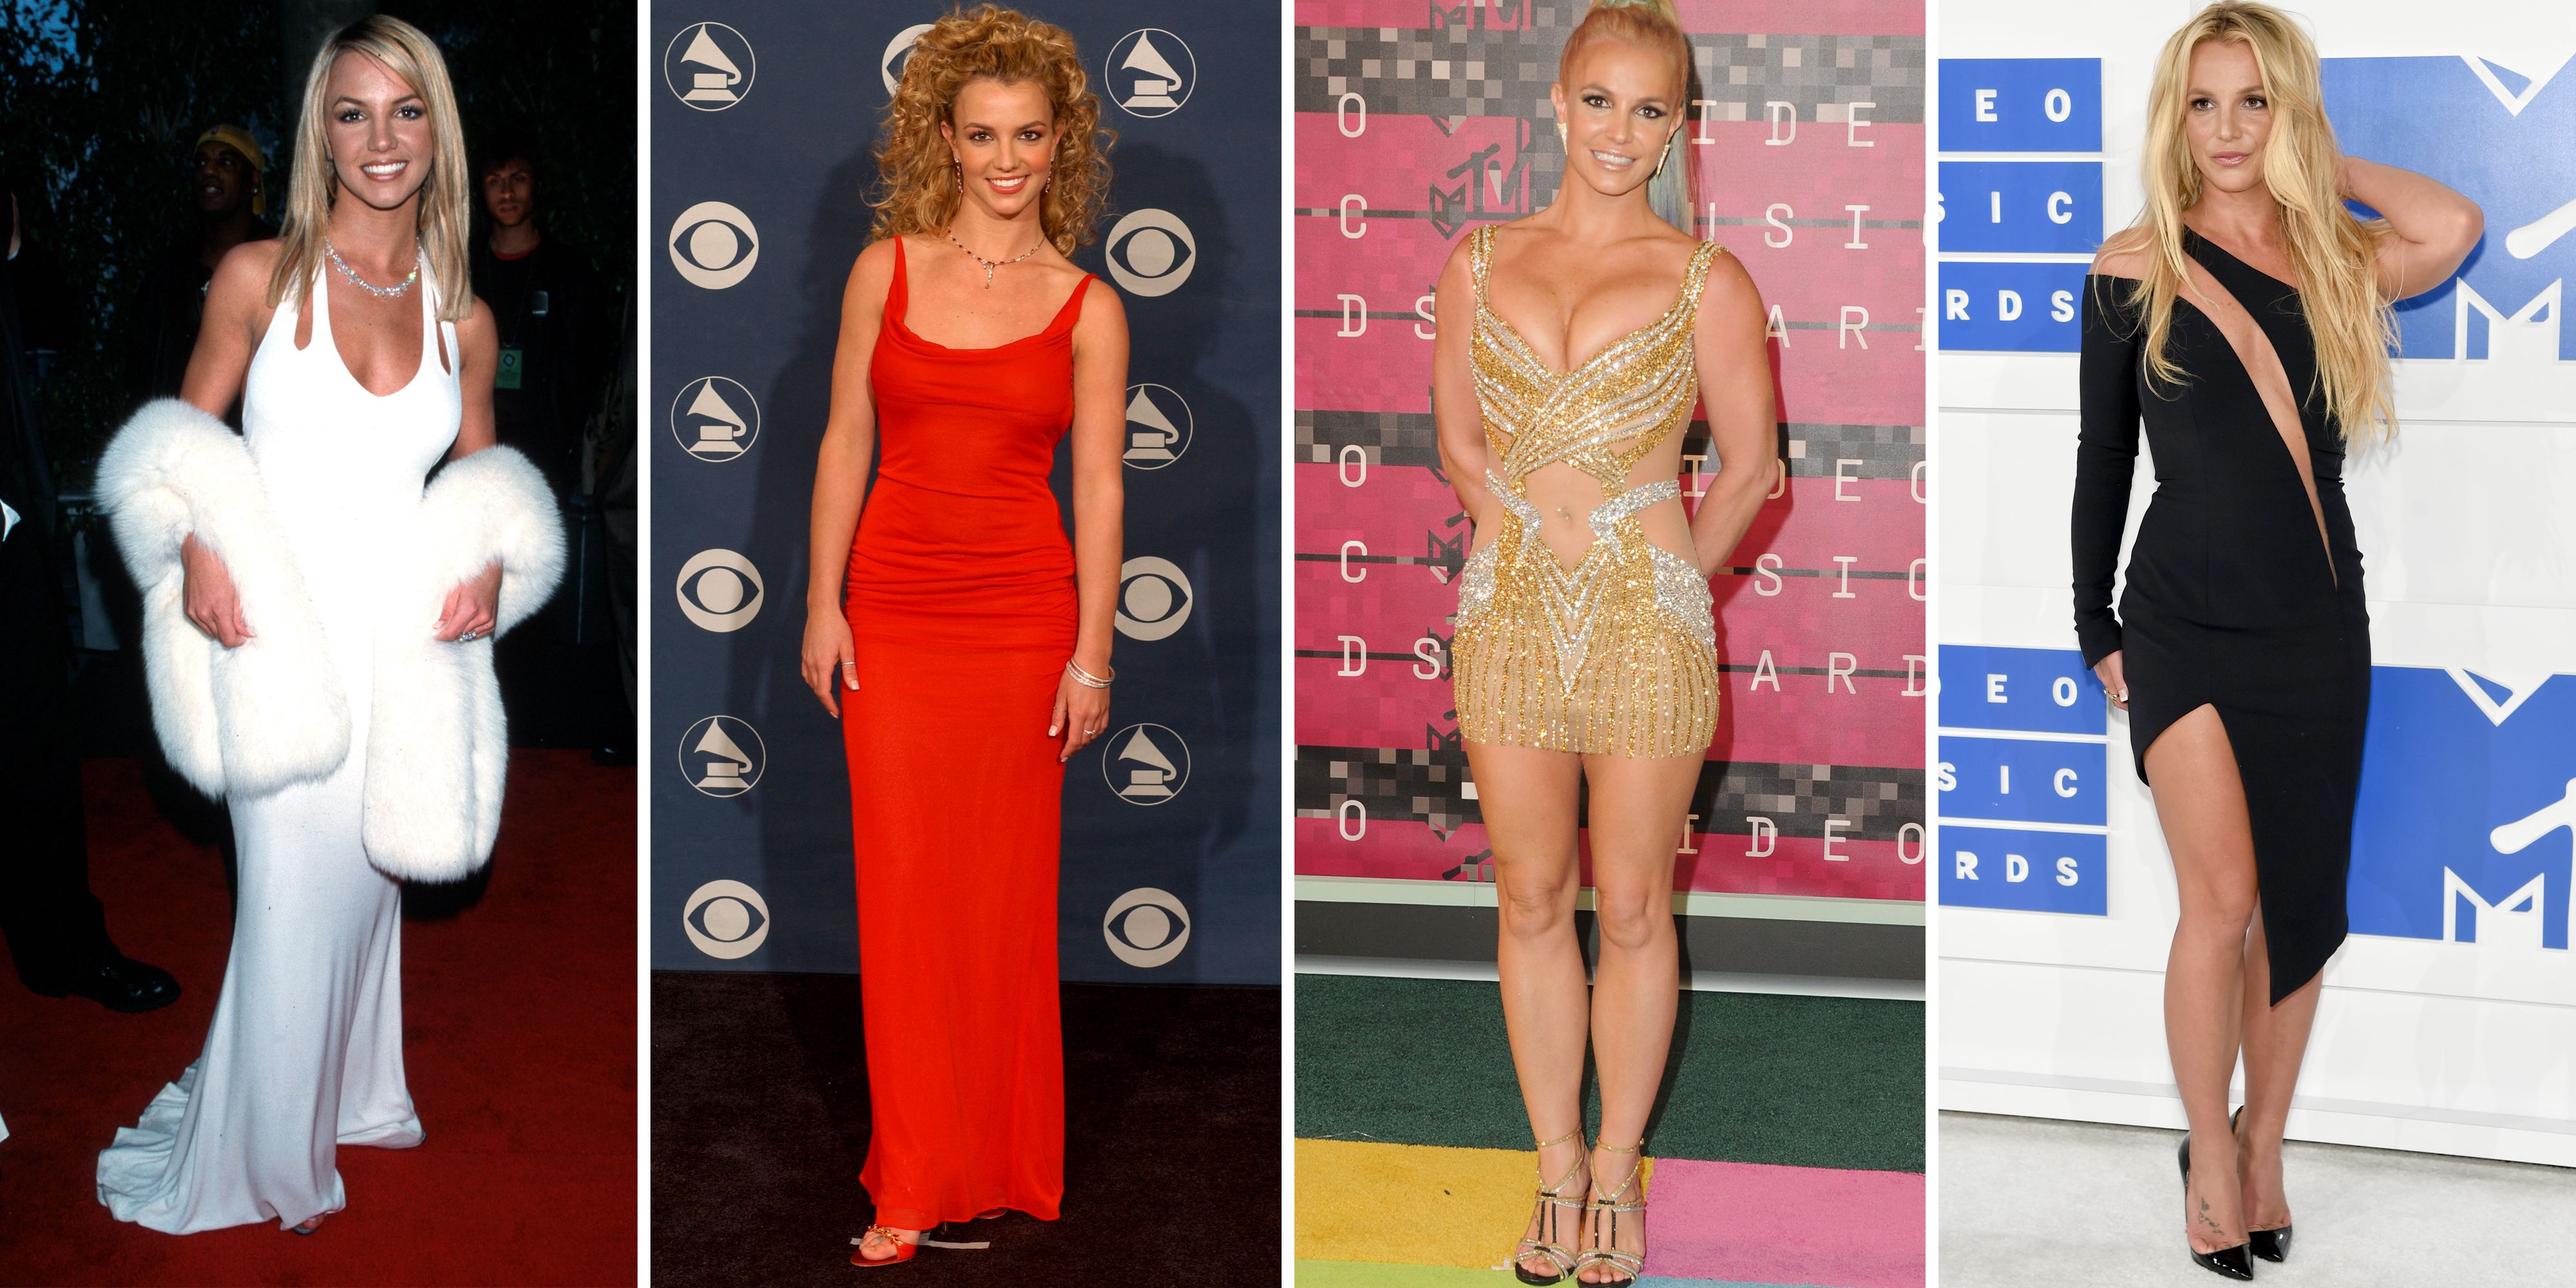 <p>Britney Spears has had an unforgettable career, and as the subject of the <a href="https://www.harpersbazaar.com/celebrity/latest/a34113034/why-longtime-britney-spears-fans-are-demanding-to-freebritney/">#FreeBritney movement</a>, the <a href="https://www.harpersbazaar.com/celebrity/latest/a35447237/miley-cyrus-supports-free-britney-movement/">"Toxic" singer</a> has proven that she still has a passionate fanbase after more than twenty years in the industry. Here, we take a look back at some of the key moments of <a href="https://www.harpersbazaar.com/celebrity/latest/a35469309/britney-spears-speaks-out-after-framing-britney/">Britney Spears's life</a> in photos.</p>